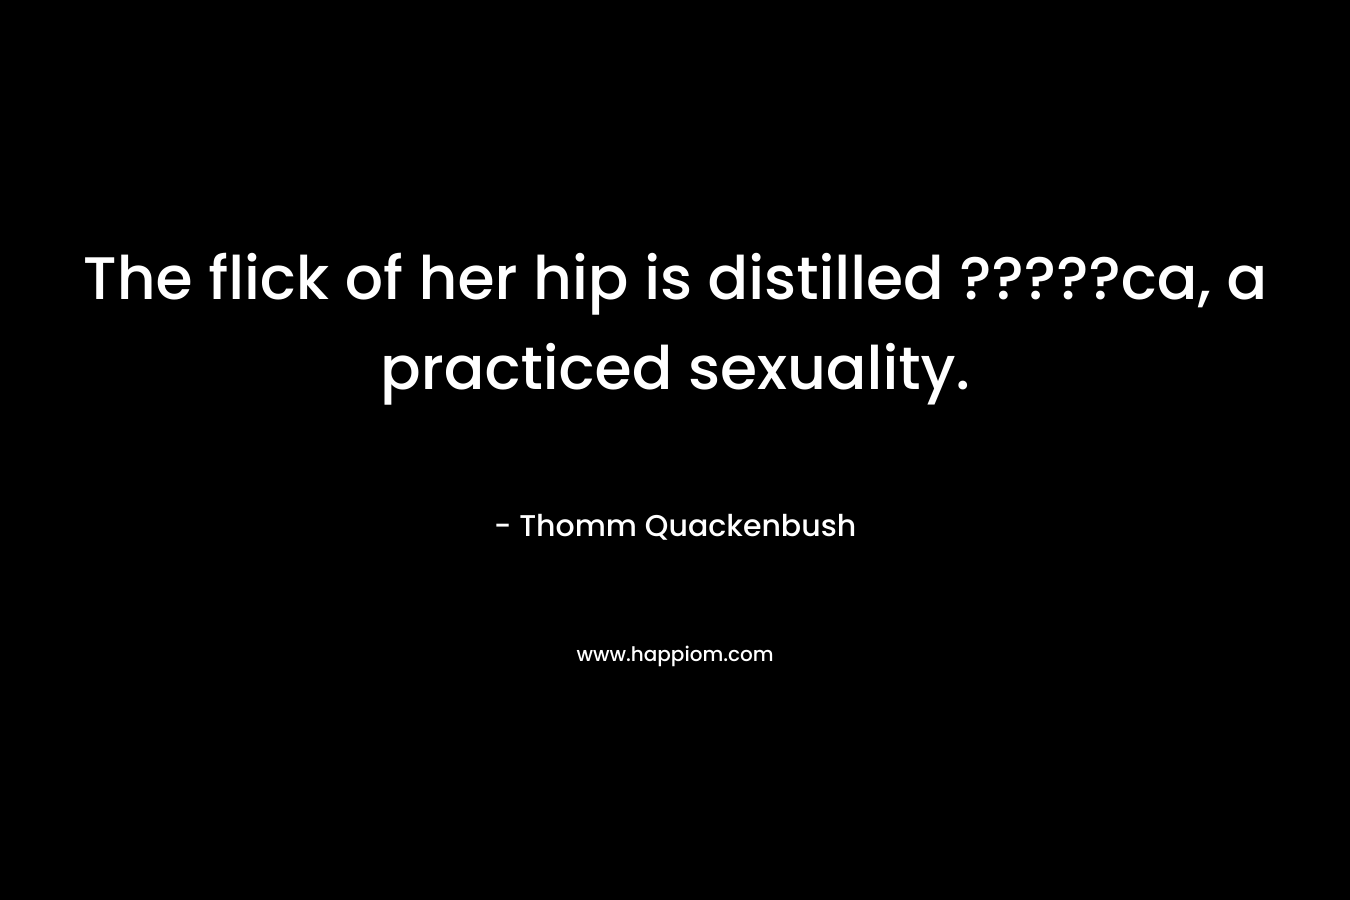 The flick of her hip is distilled ?????ca, a practiced sexuality. – Thomm Quackenbush